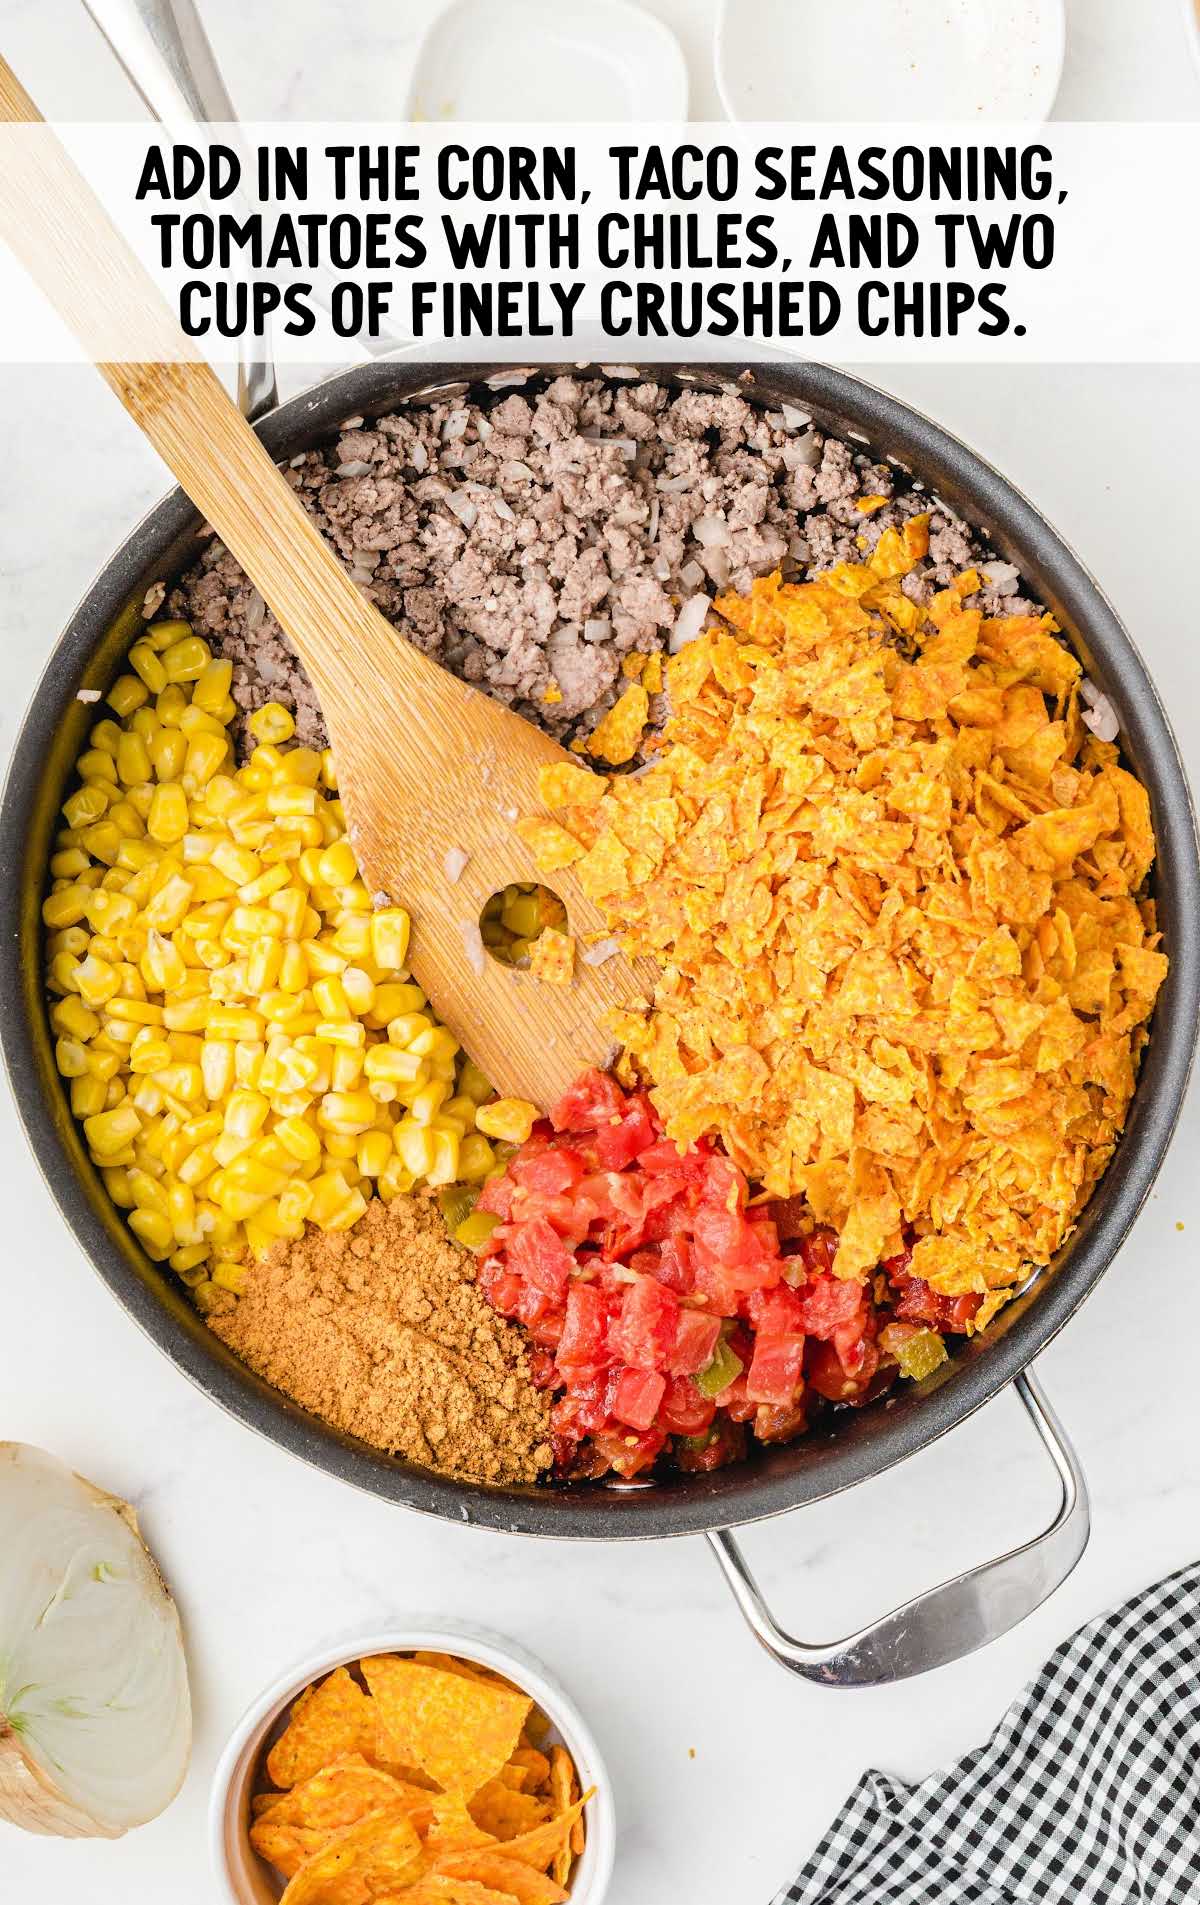 corn, taco seasoning, tomatoes, and chips added to the ground beef mixture in the skillet